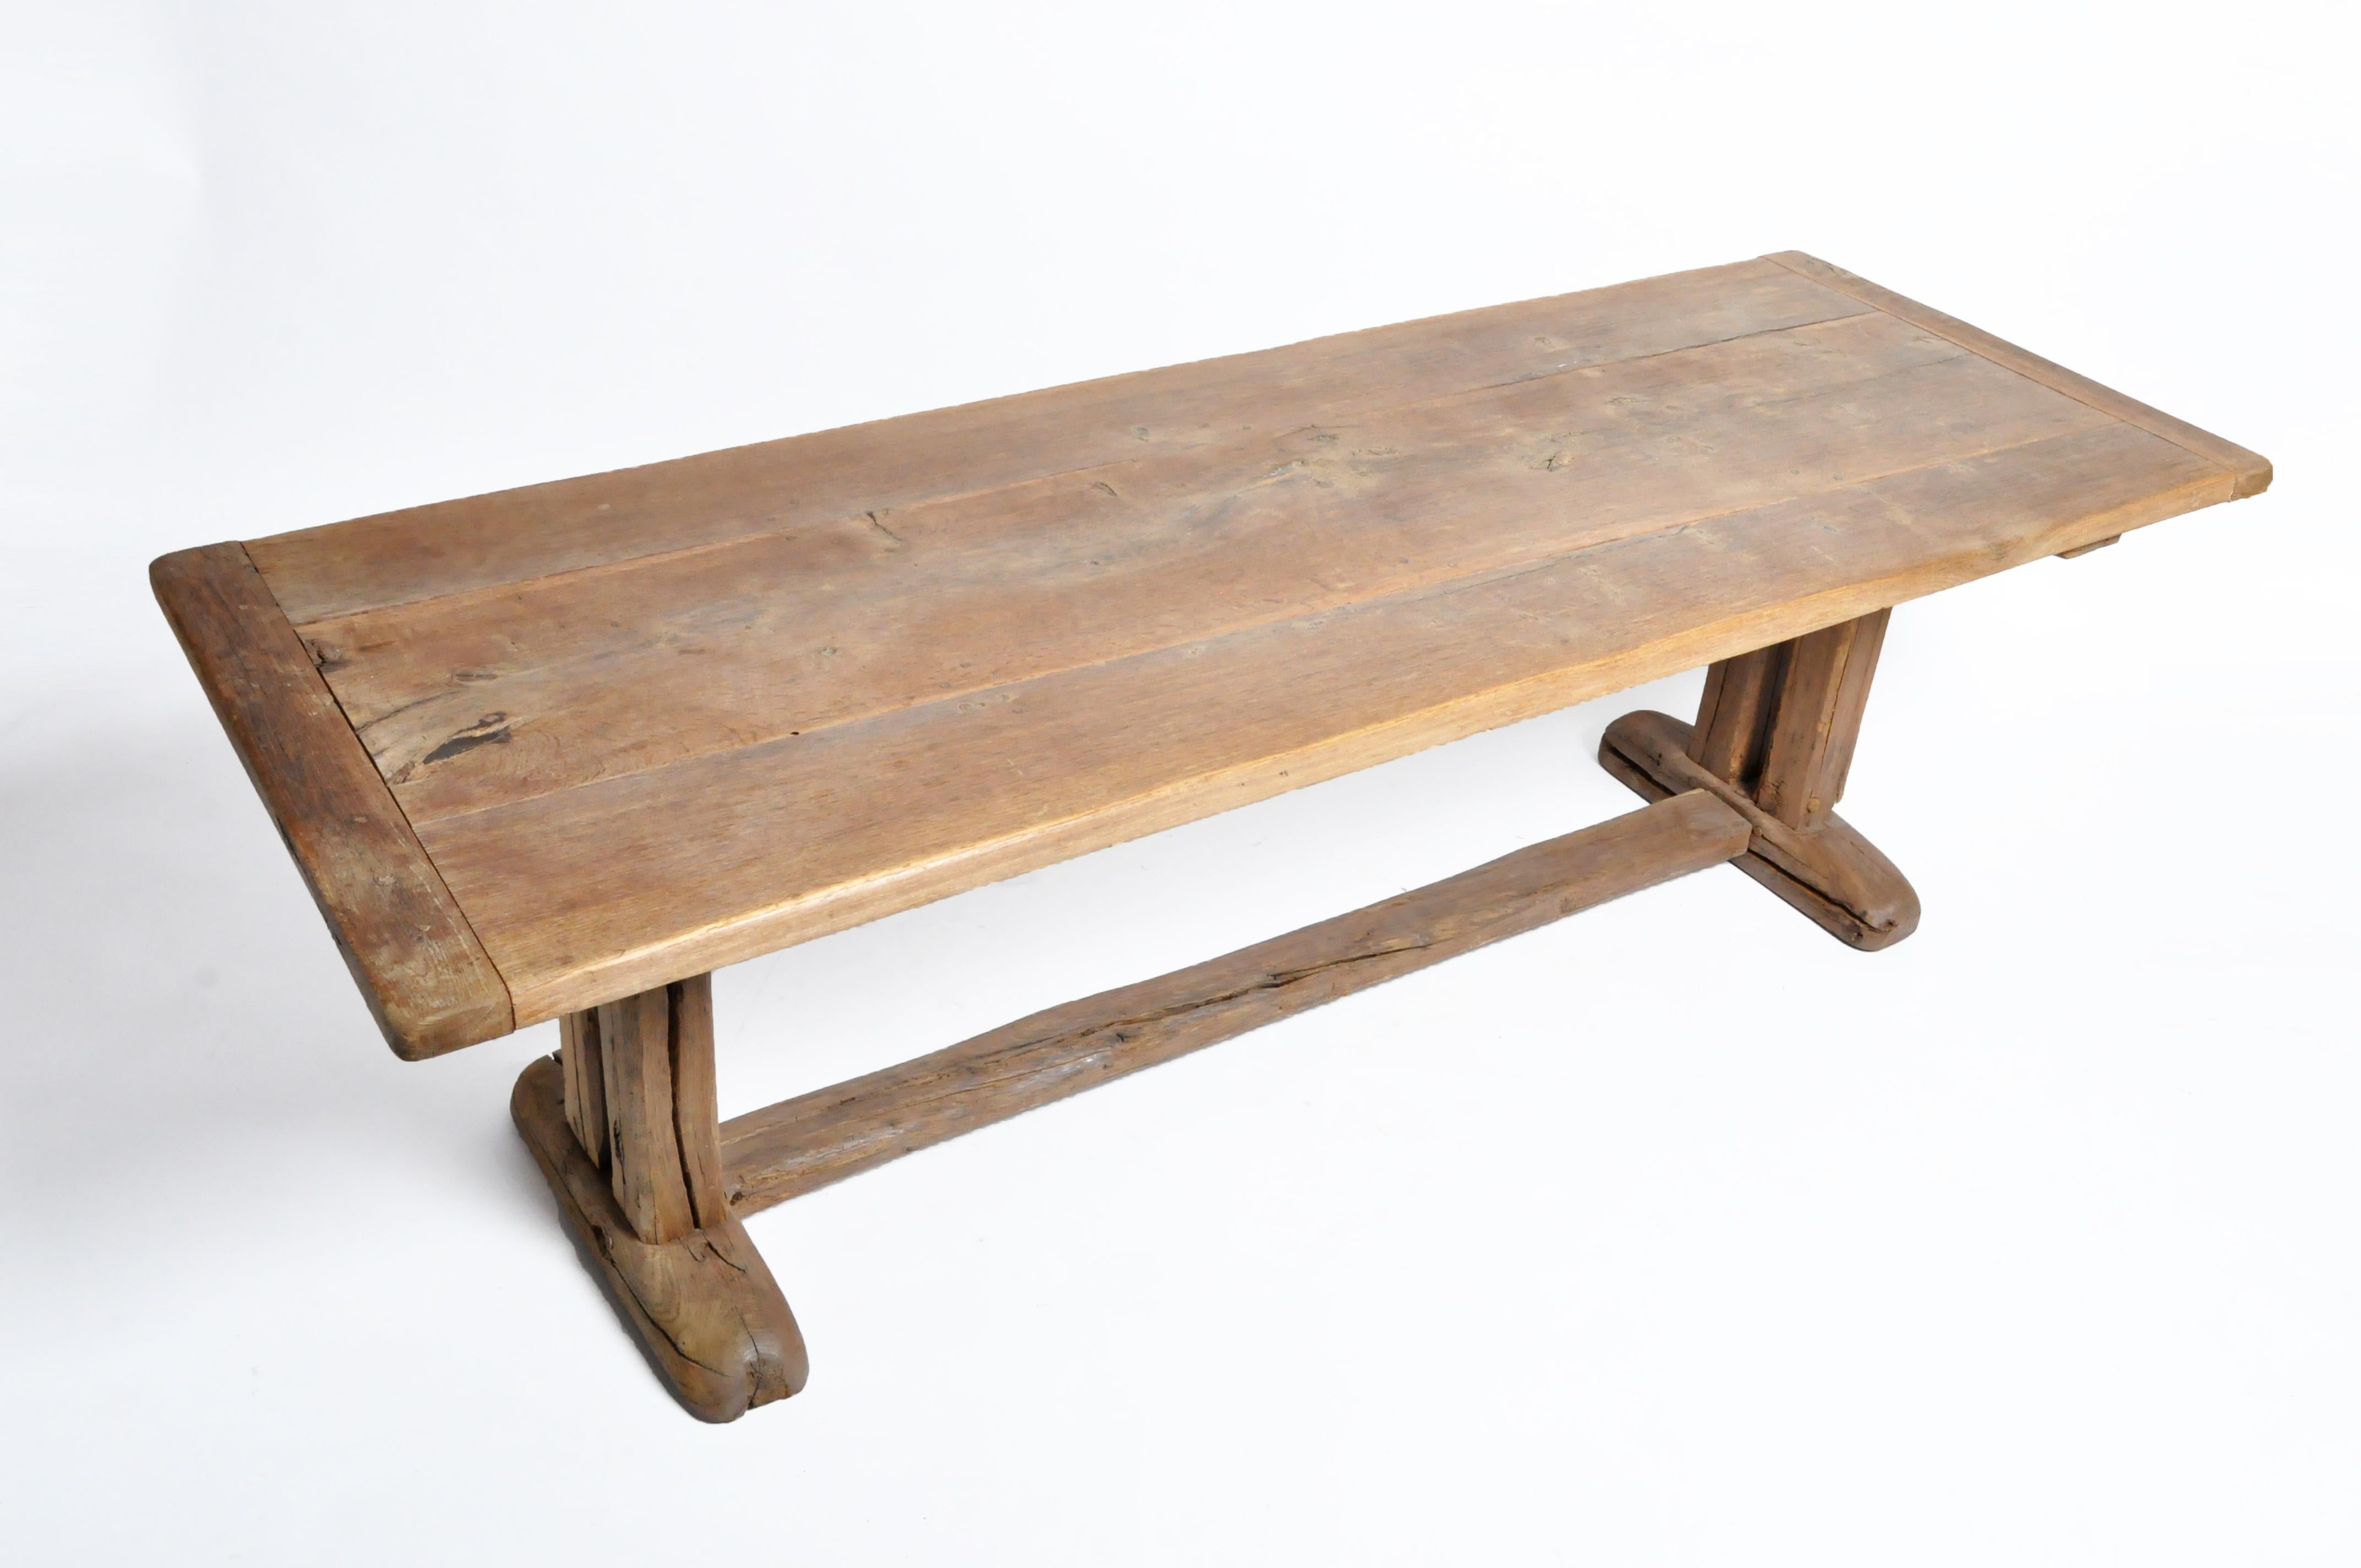 This rustic long farm table is from Switzerland and was made from oak wood, circa mid-19th century. The table features a finely age and beautiful patina. The table can be used as a work table, farm table, dining table, or conference table. Wear